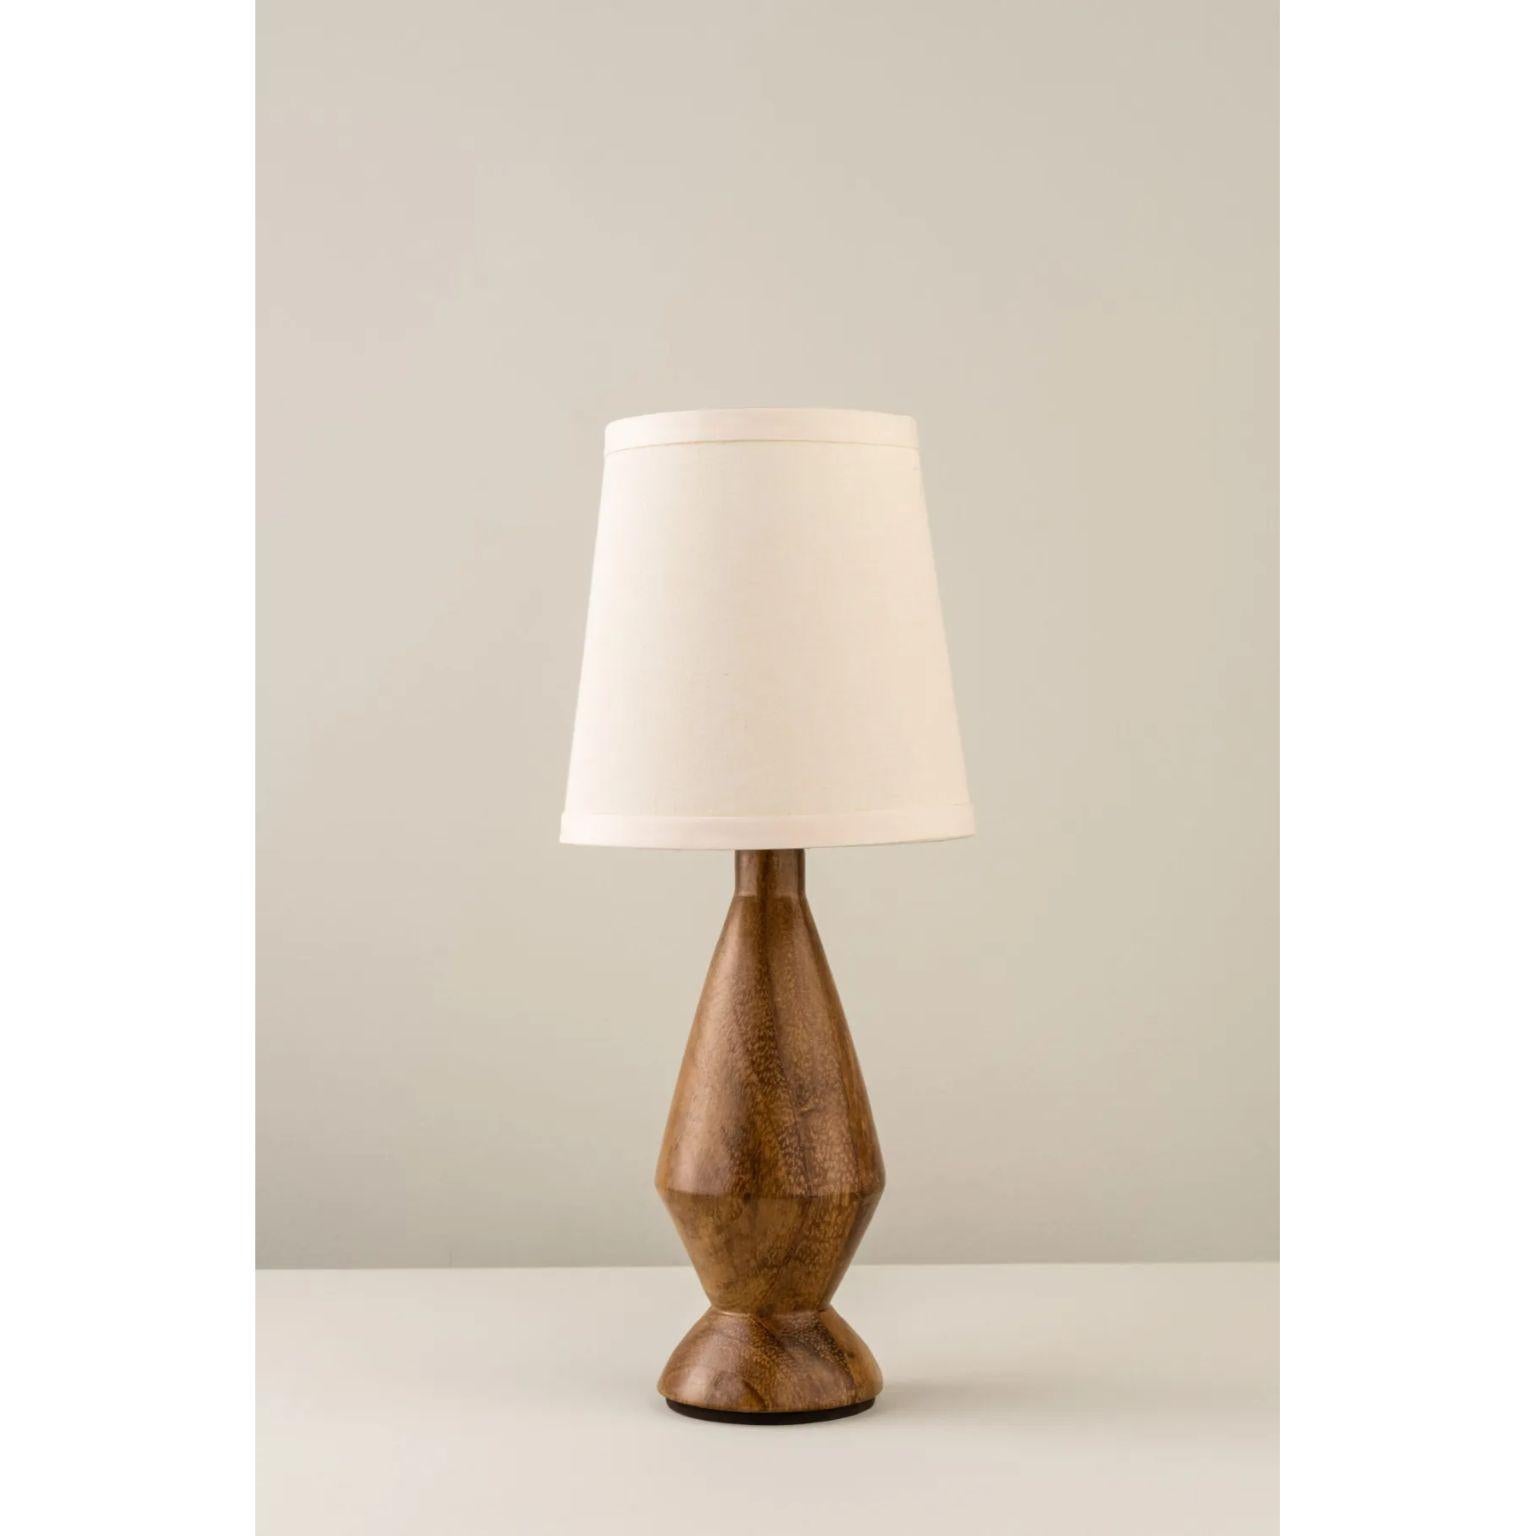 Trompo Table Lamp by Isabel Moncada
Dimensions: Ø 15.5 x H 35.5 cm.
Materials: Parota wood base and styrene screen lined with fabric.

Trompo is a traditional Mexican wooden toy that rotates on its axis, similar to this small and graceful rhomboid